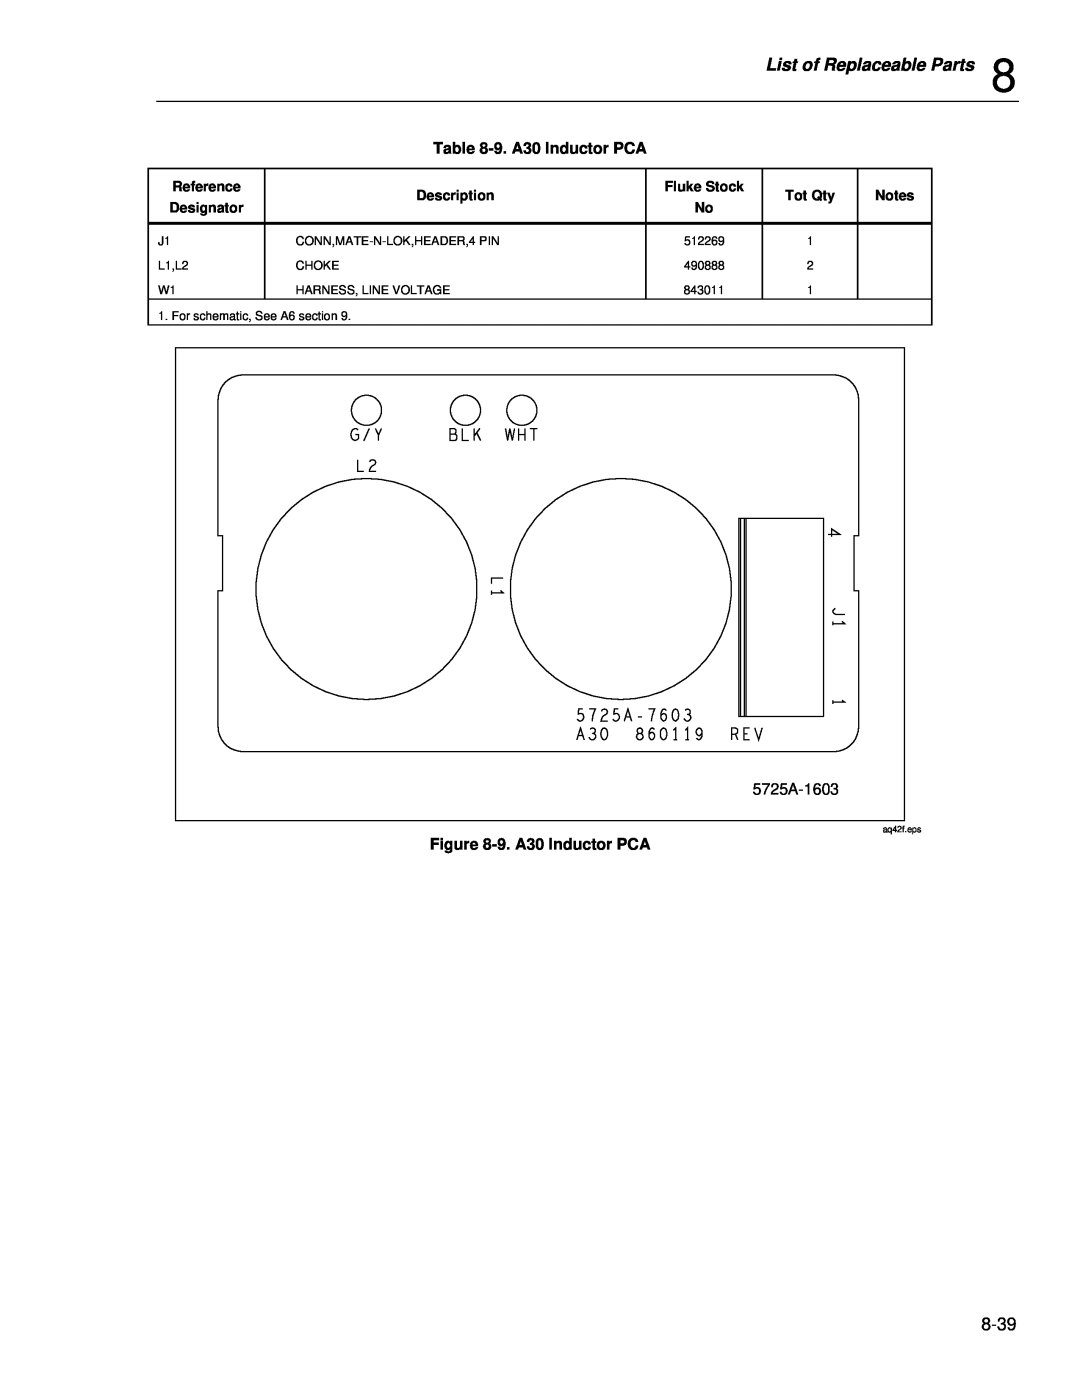 Fluke instruction manual List of Replaceable Parts, 9.A30 Inductor PCA, 5725A-1603, aq42f.eps 